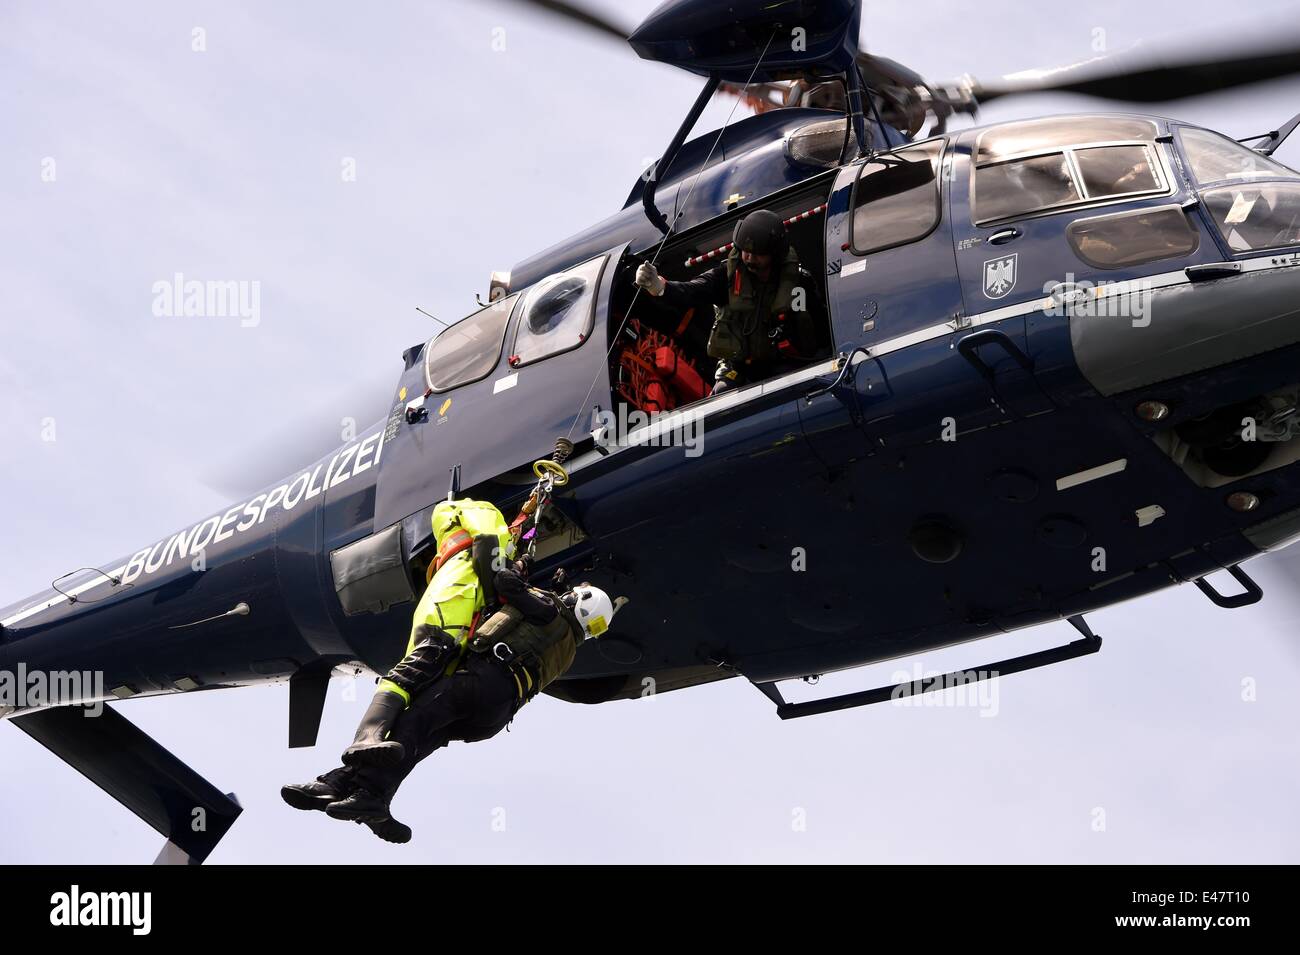 Neustadt, Germany. 17th June, 2014. A helicopter Eurocopter EC 155 pulls a member of the federal police ship 'Neustrelitz' into the air in Neustadt, Germany, 17 June 2014. The federal police celebrates the 50th anniversary. Photo: Carsten Rehder/dpa/Alamy Live News Stock Photo